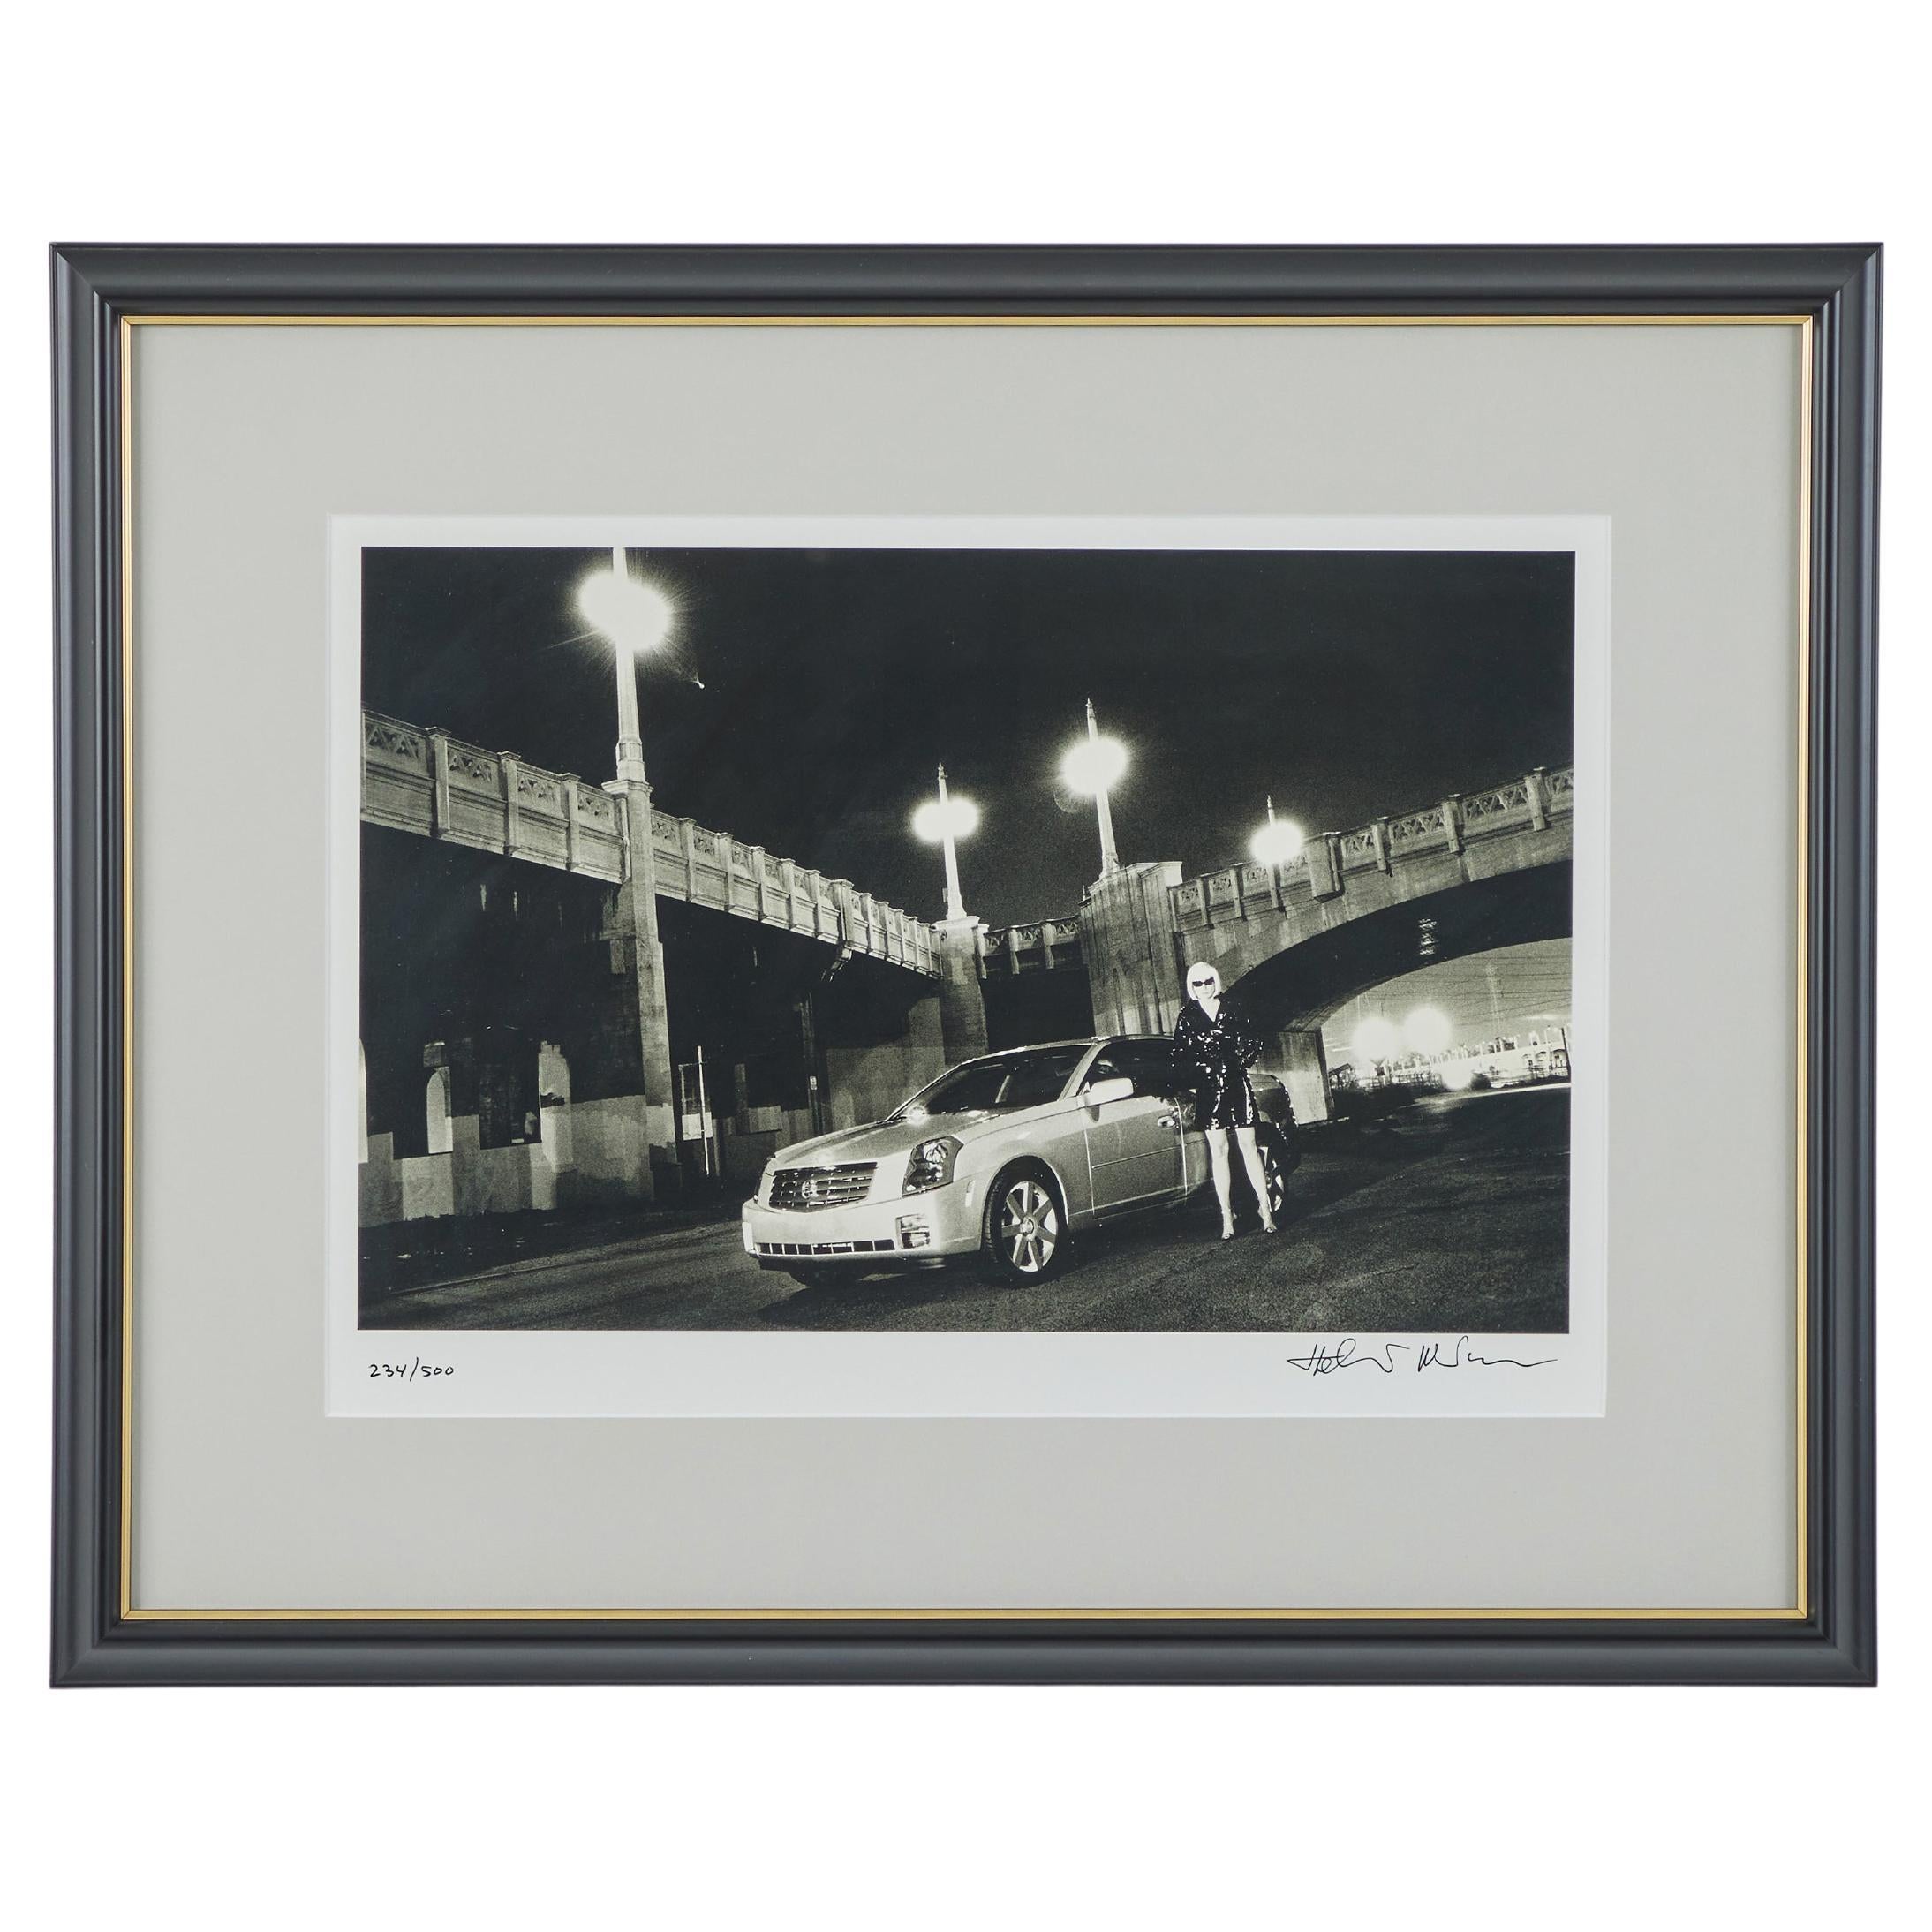 Cadillac CST and Blonde, 2002, Framed print by Helmut Newton (1920-2004)